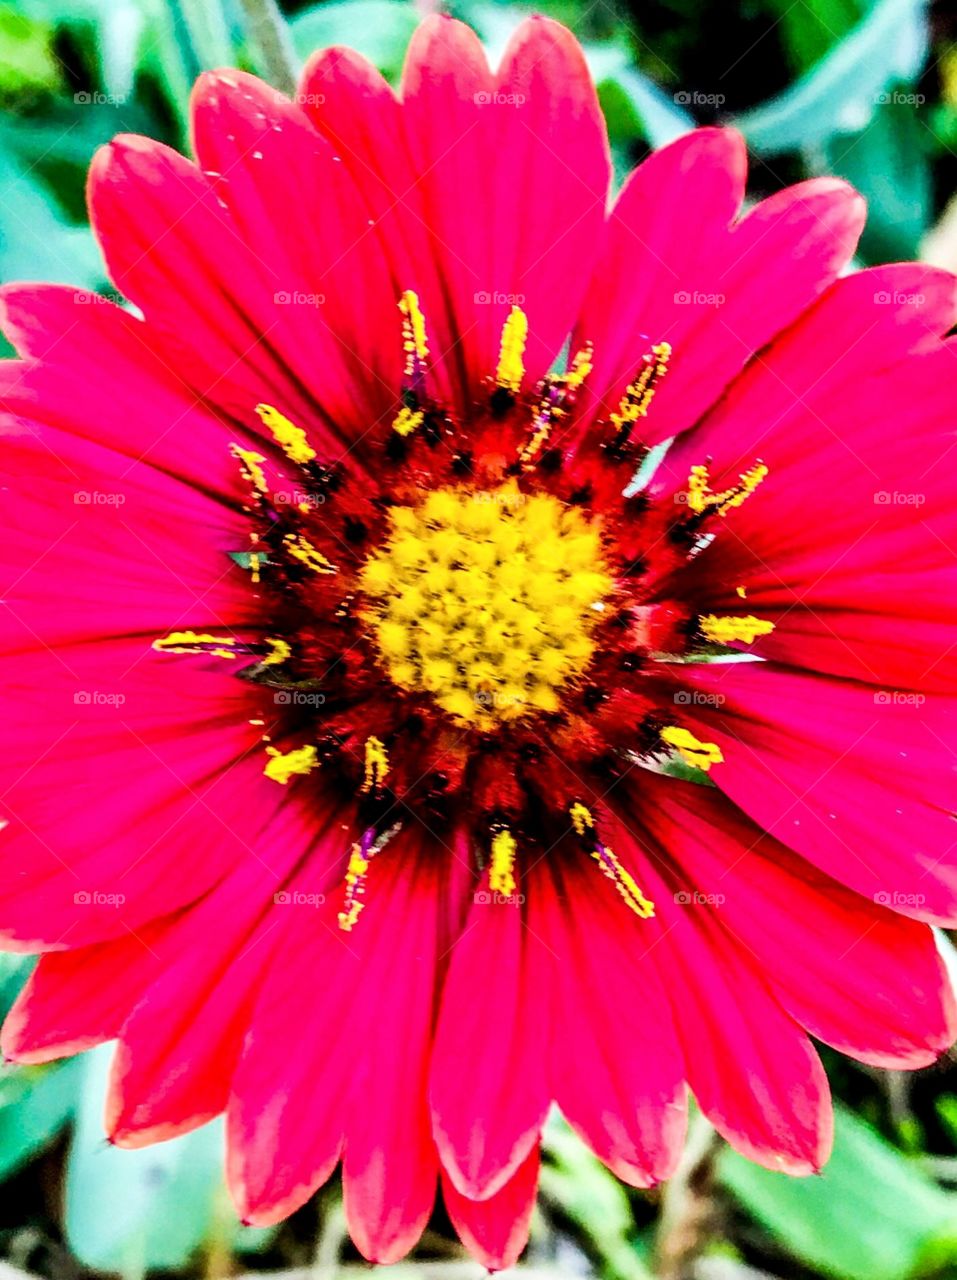 Flower Blow Up, Reddish, Pink and Beautiful